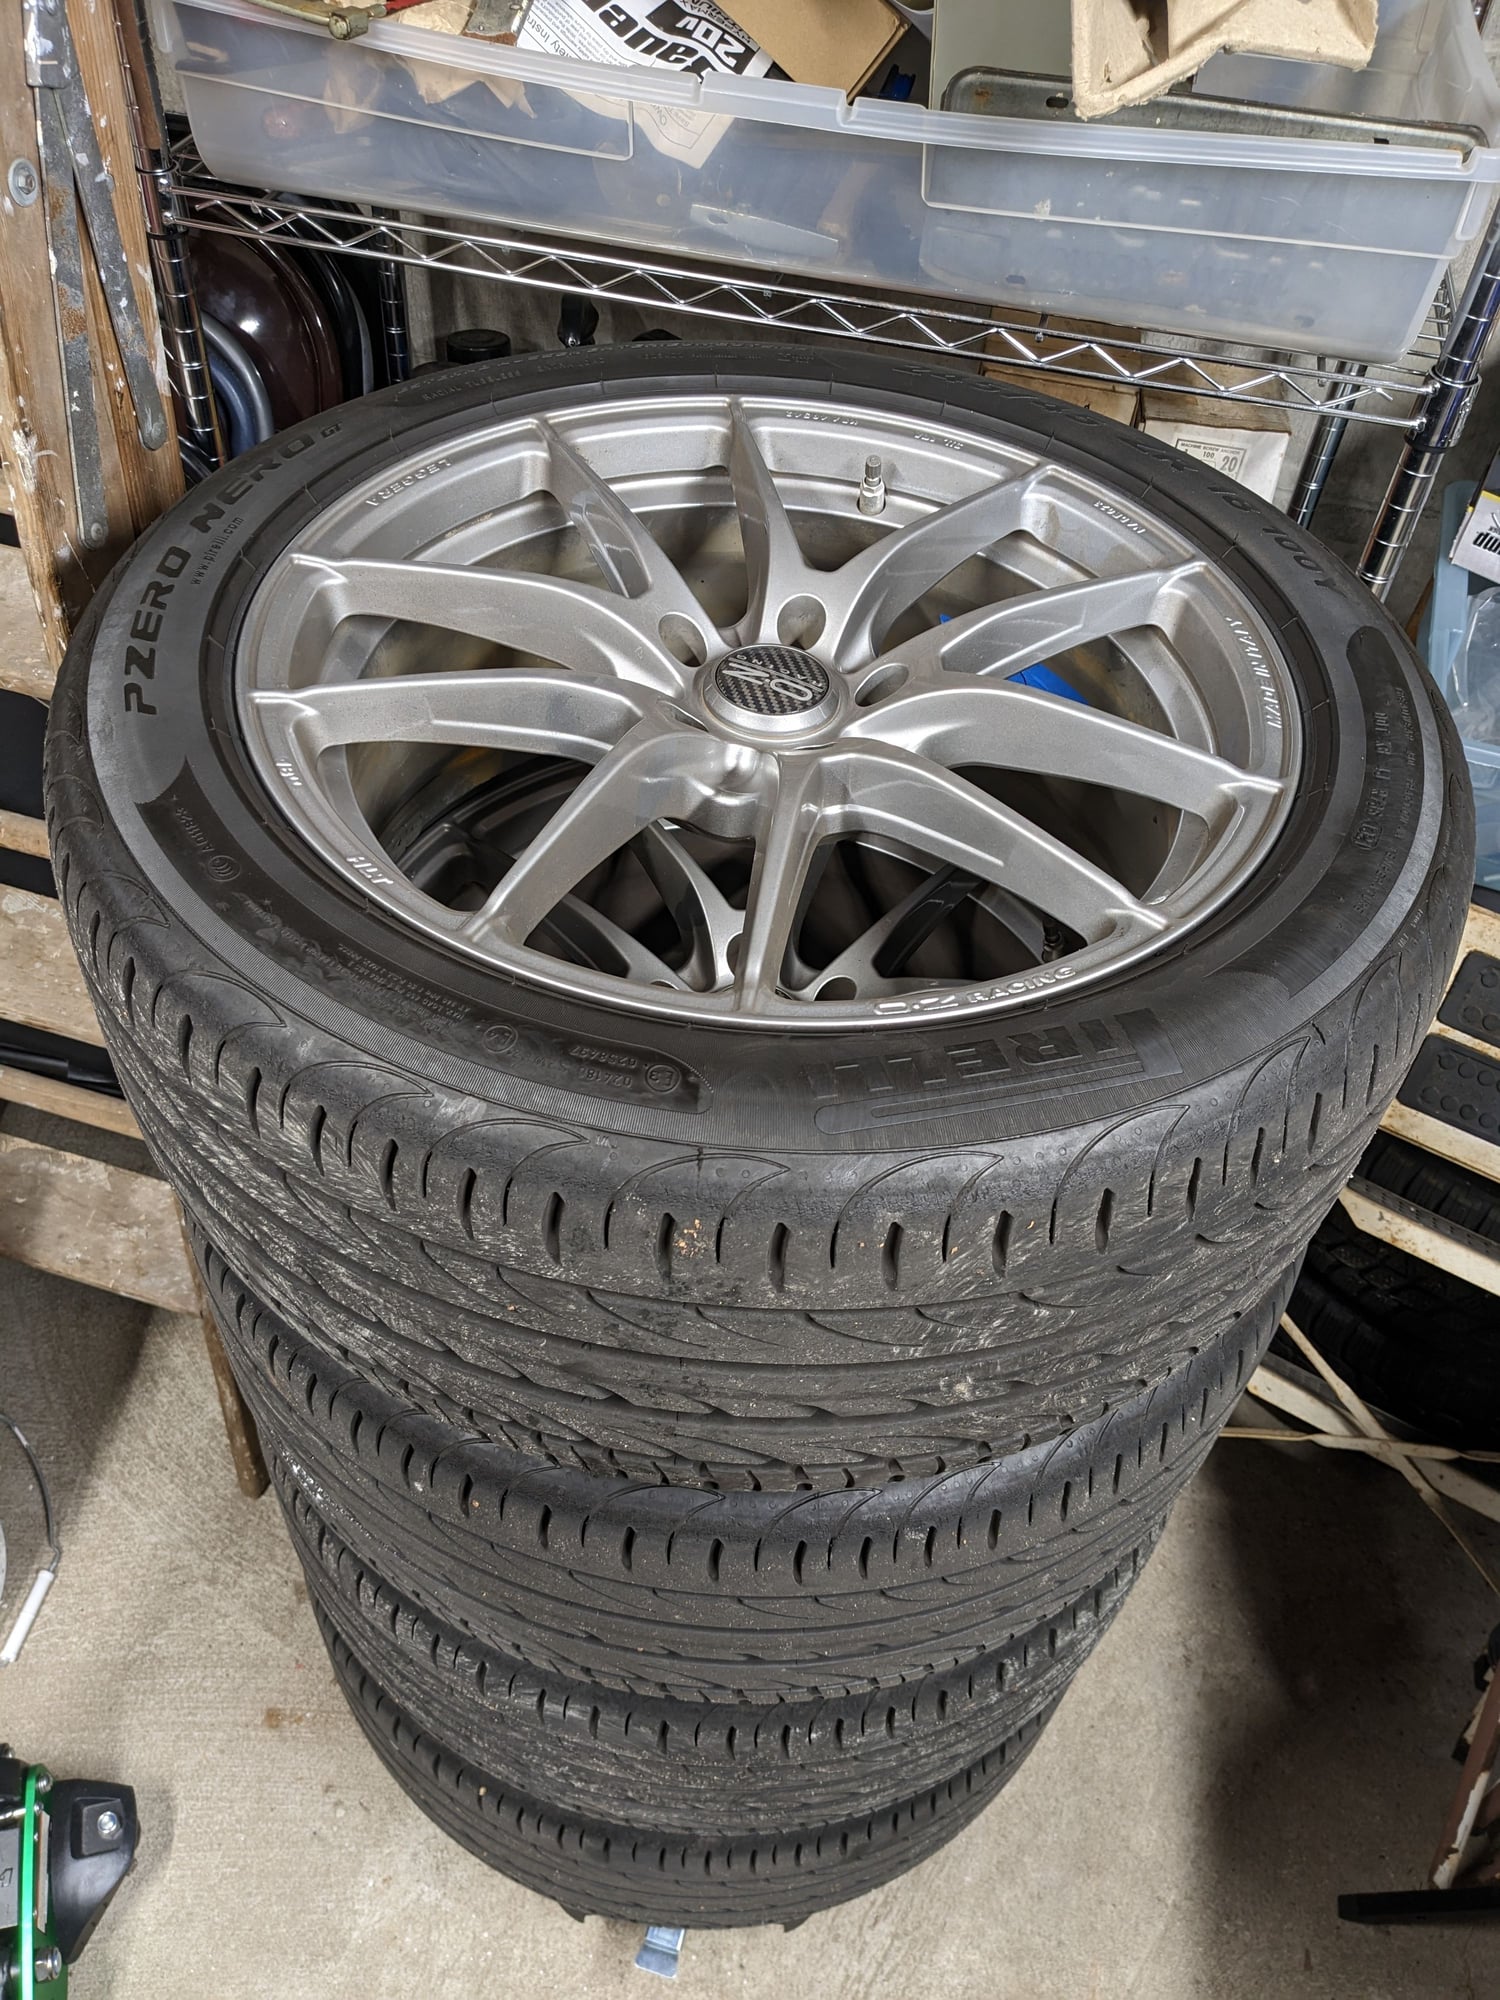 Wheels and Tires/Axles - O.Z. wheels and Pirelli summer tires - Used - 2003 to 2023 Jaguar All Models - Flushing, NY 11355, United States